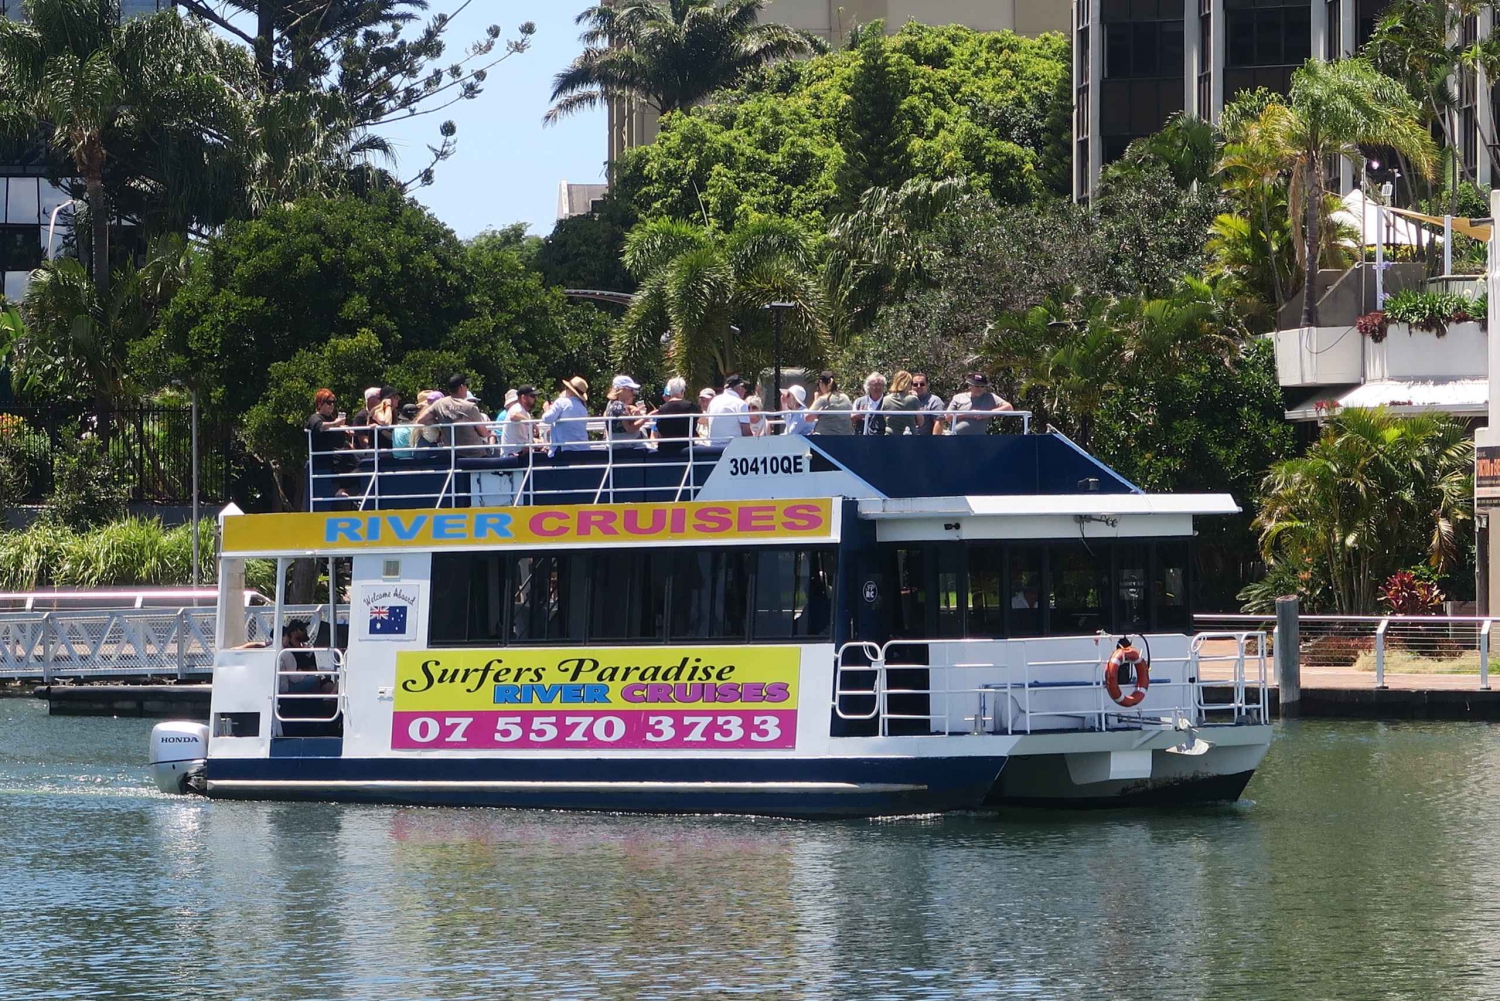 Surfers Paradise: Gold Coast Afternoon River Cruise 16.00